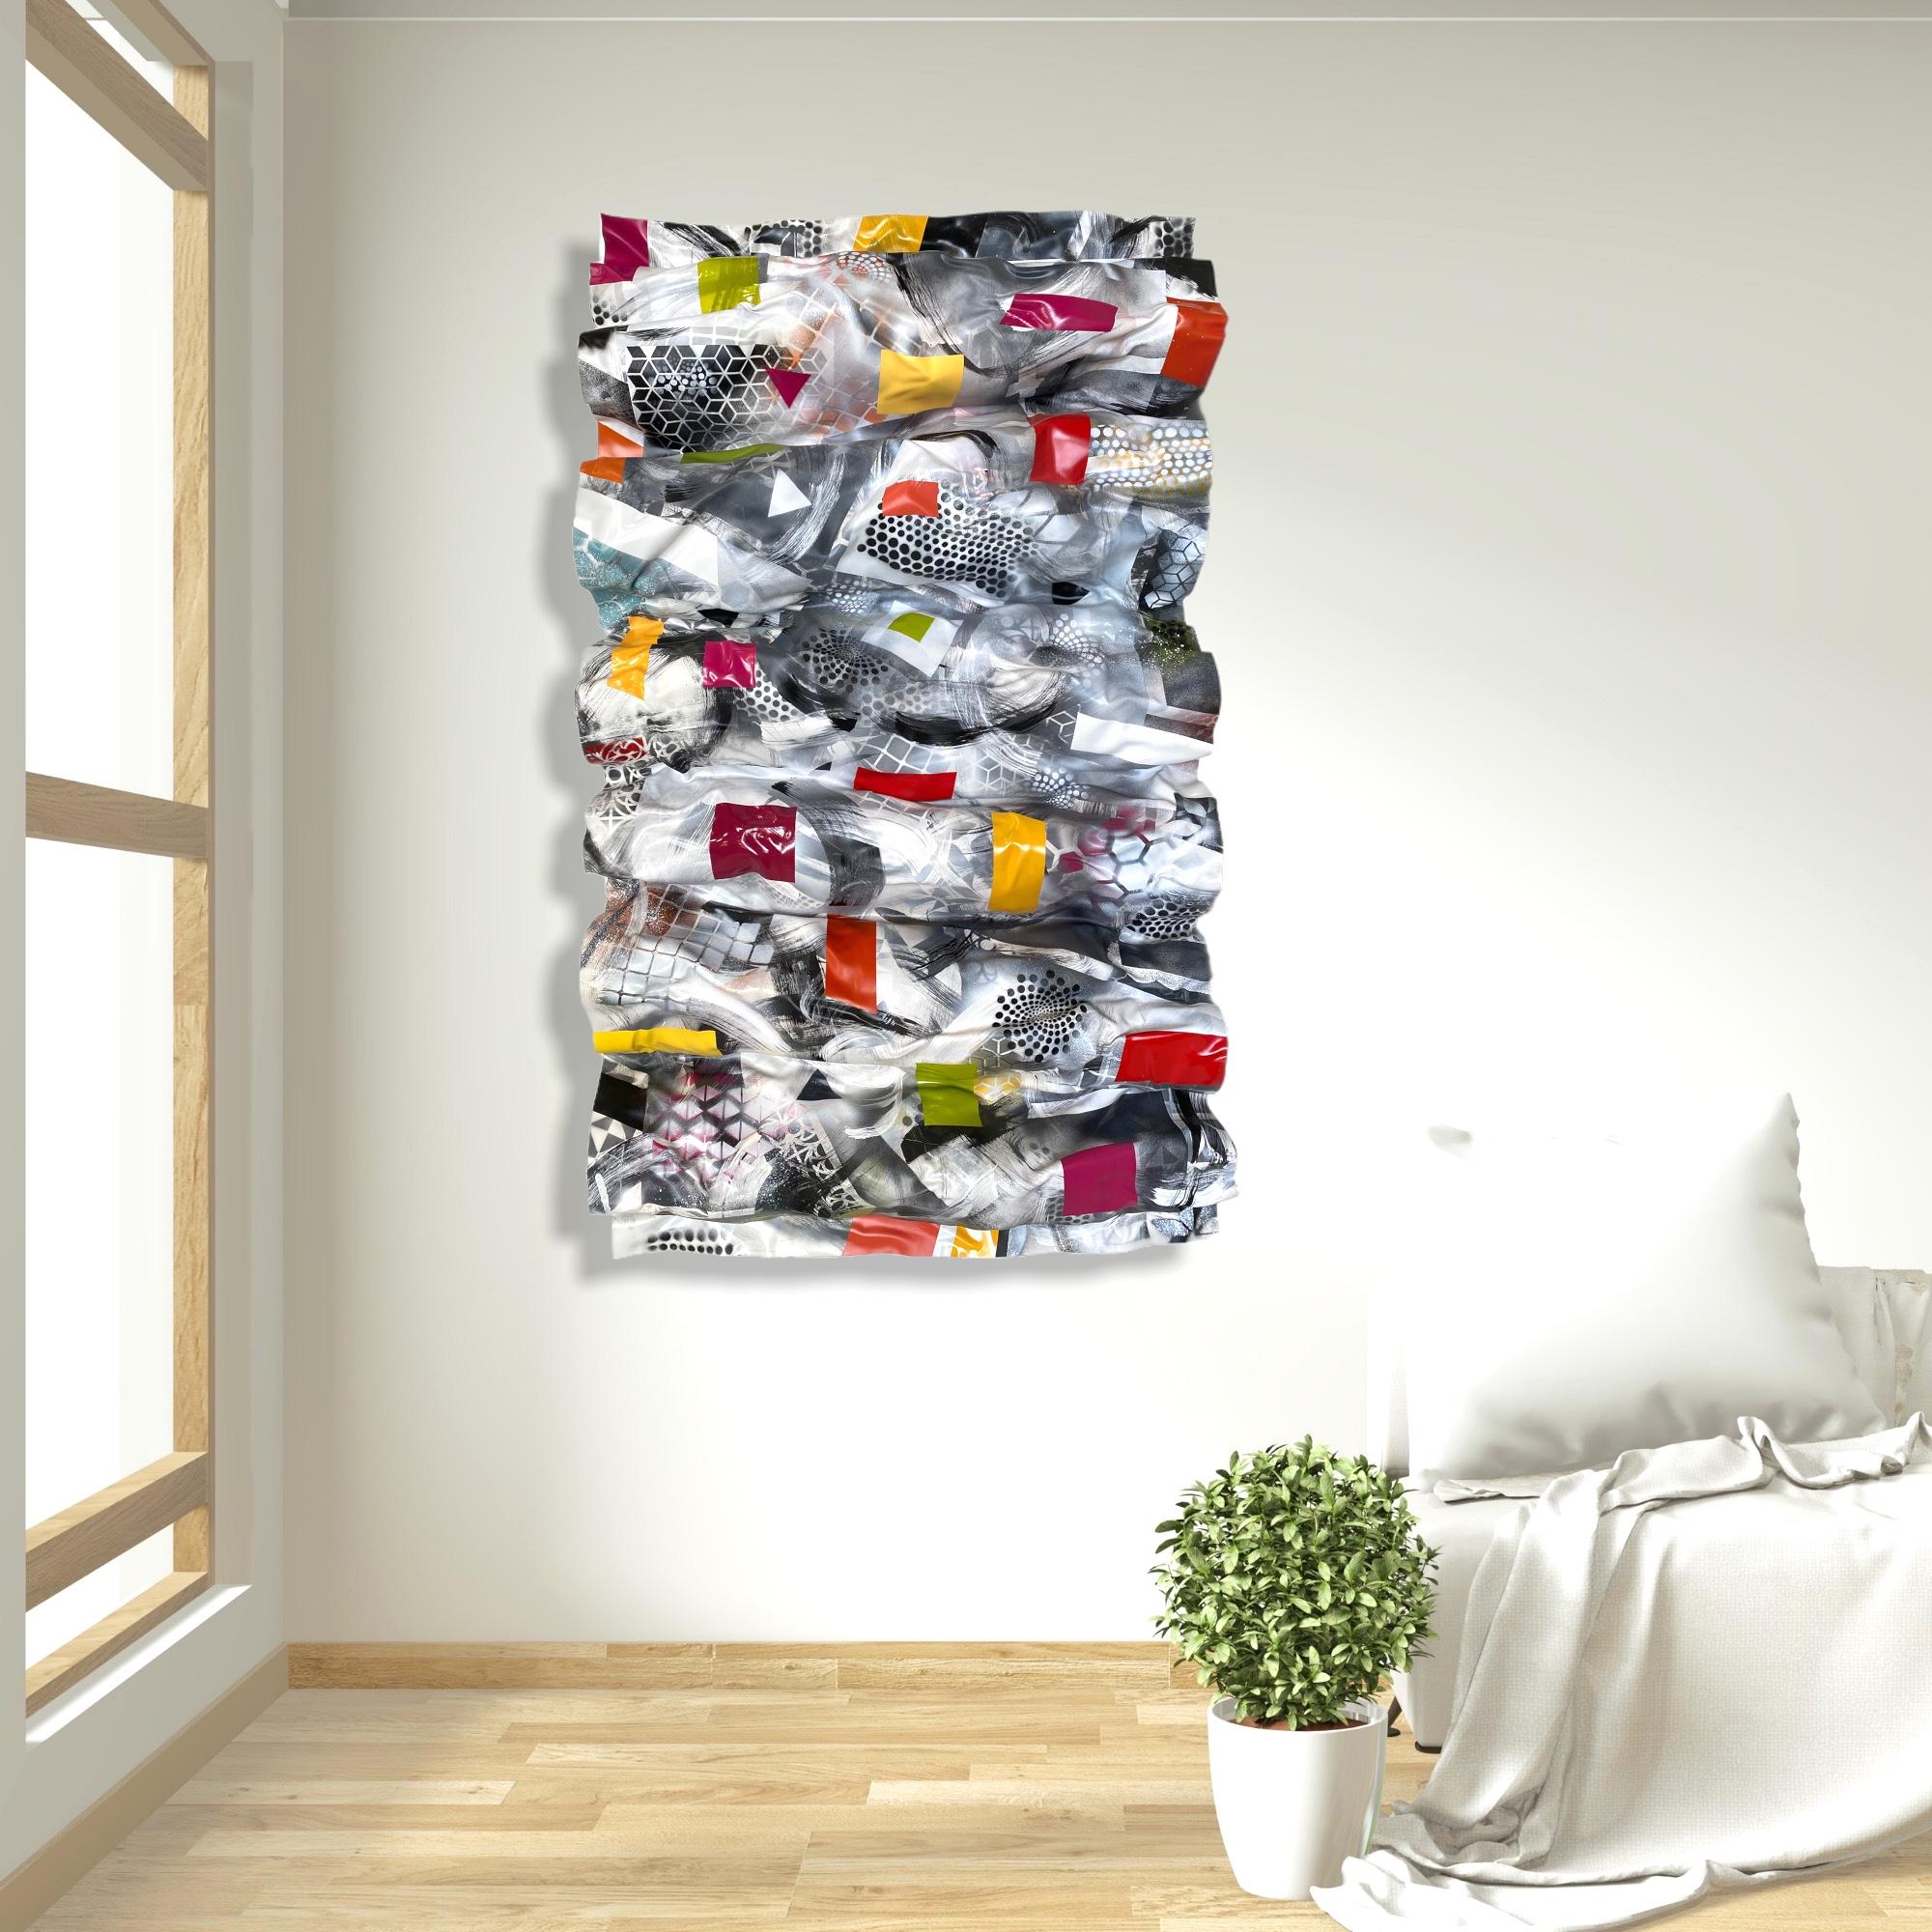 Black & White Waves.Abstract, geometric, street art, Wall Plexiglass Sculpture  - Gray Abstract Painting by Cari Cohen